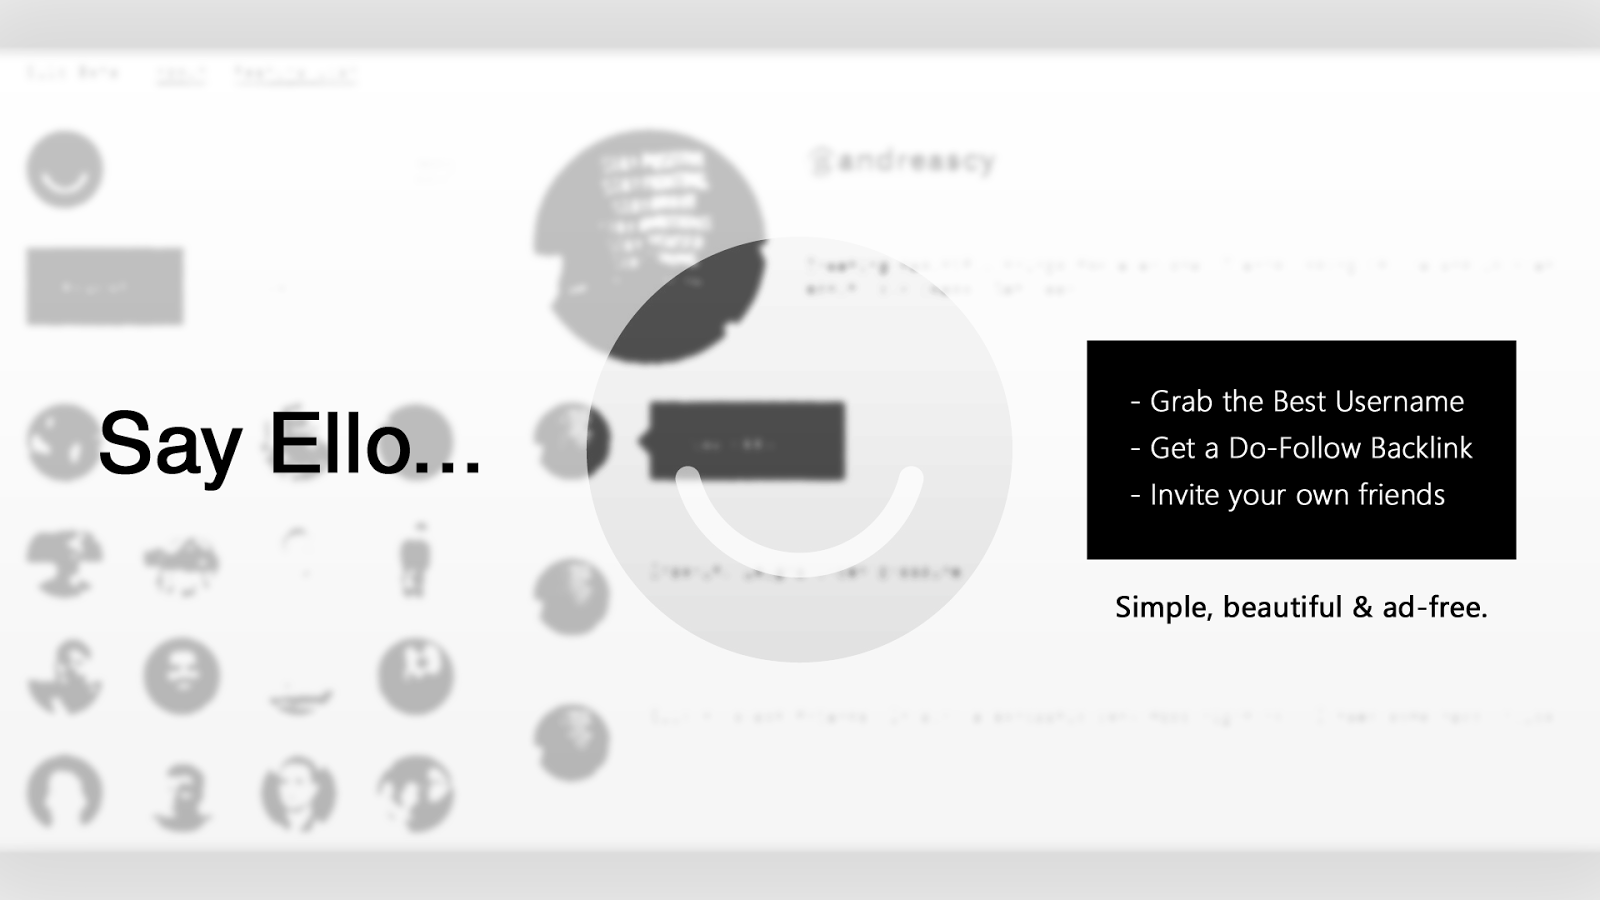 Let's talk about Ello, the New Social Network